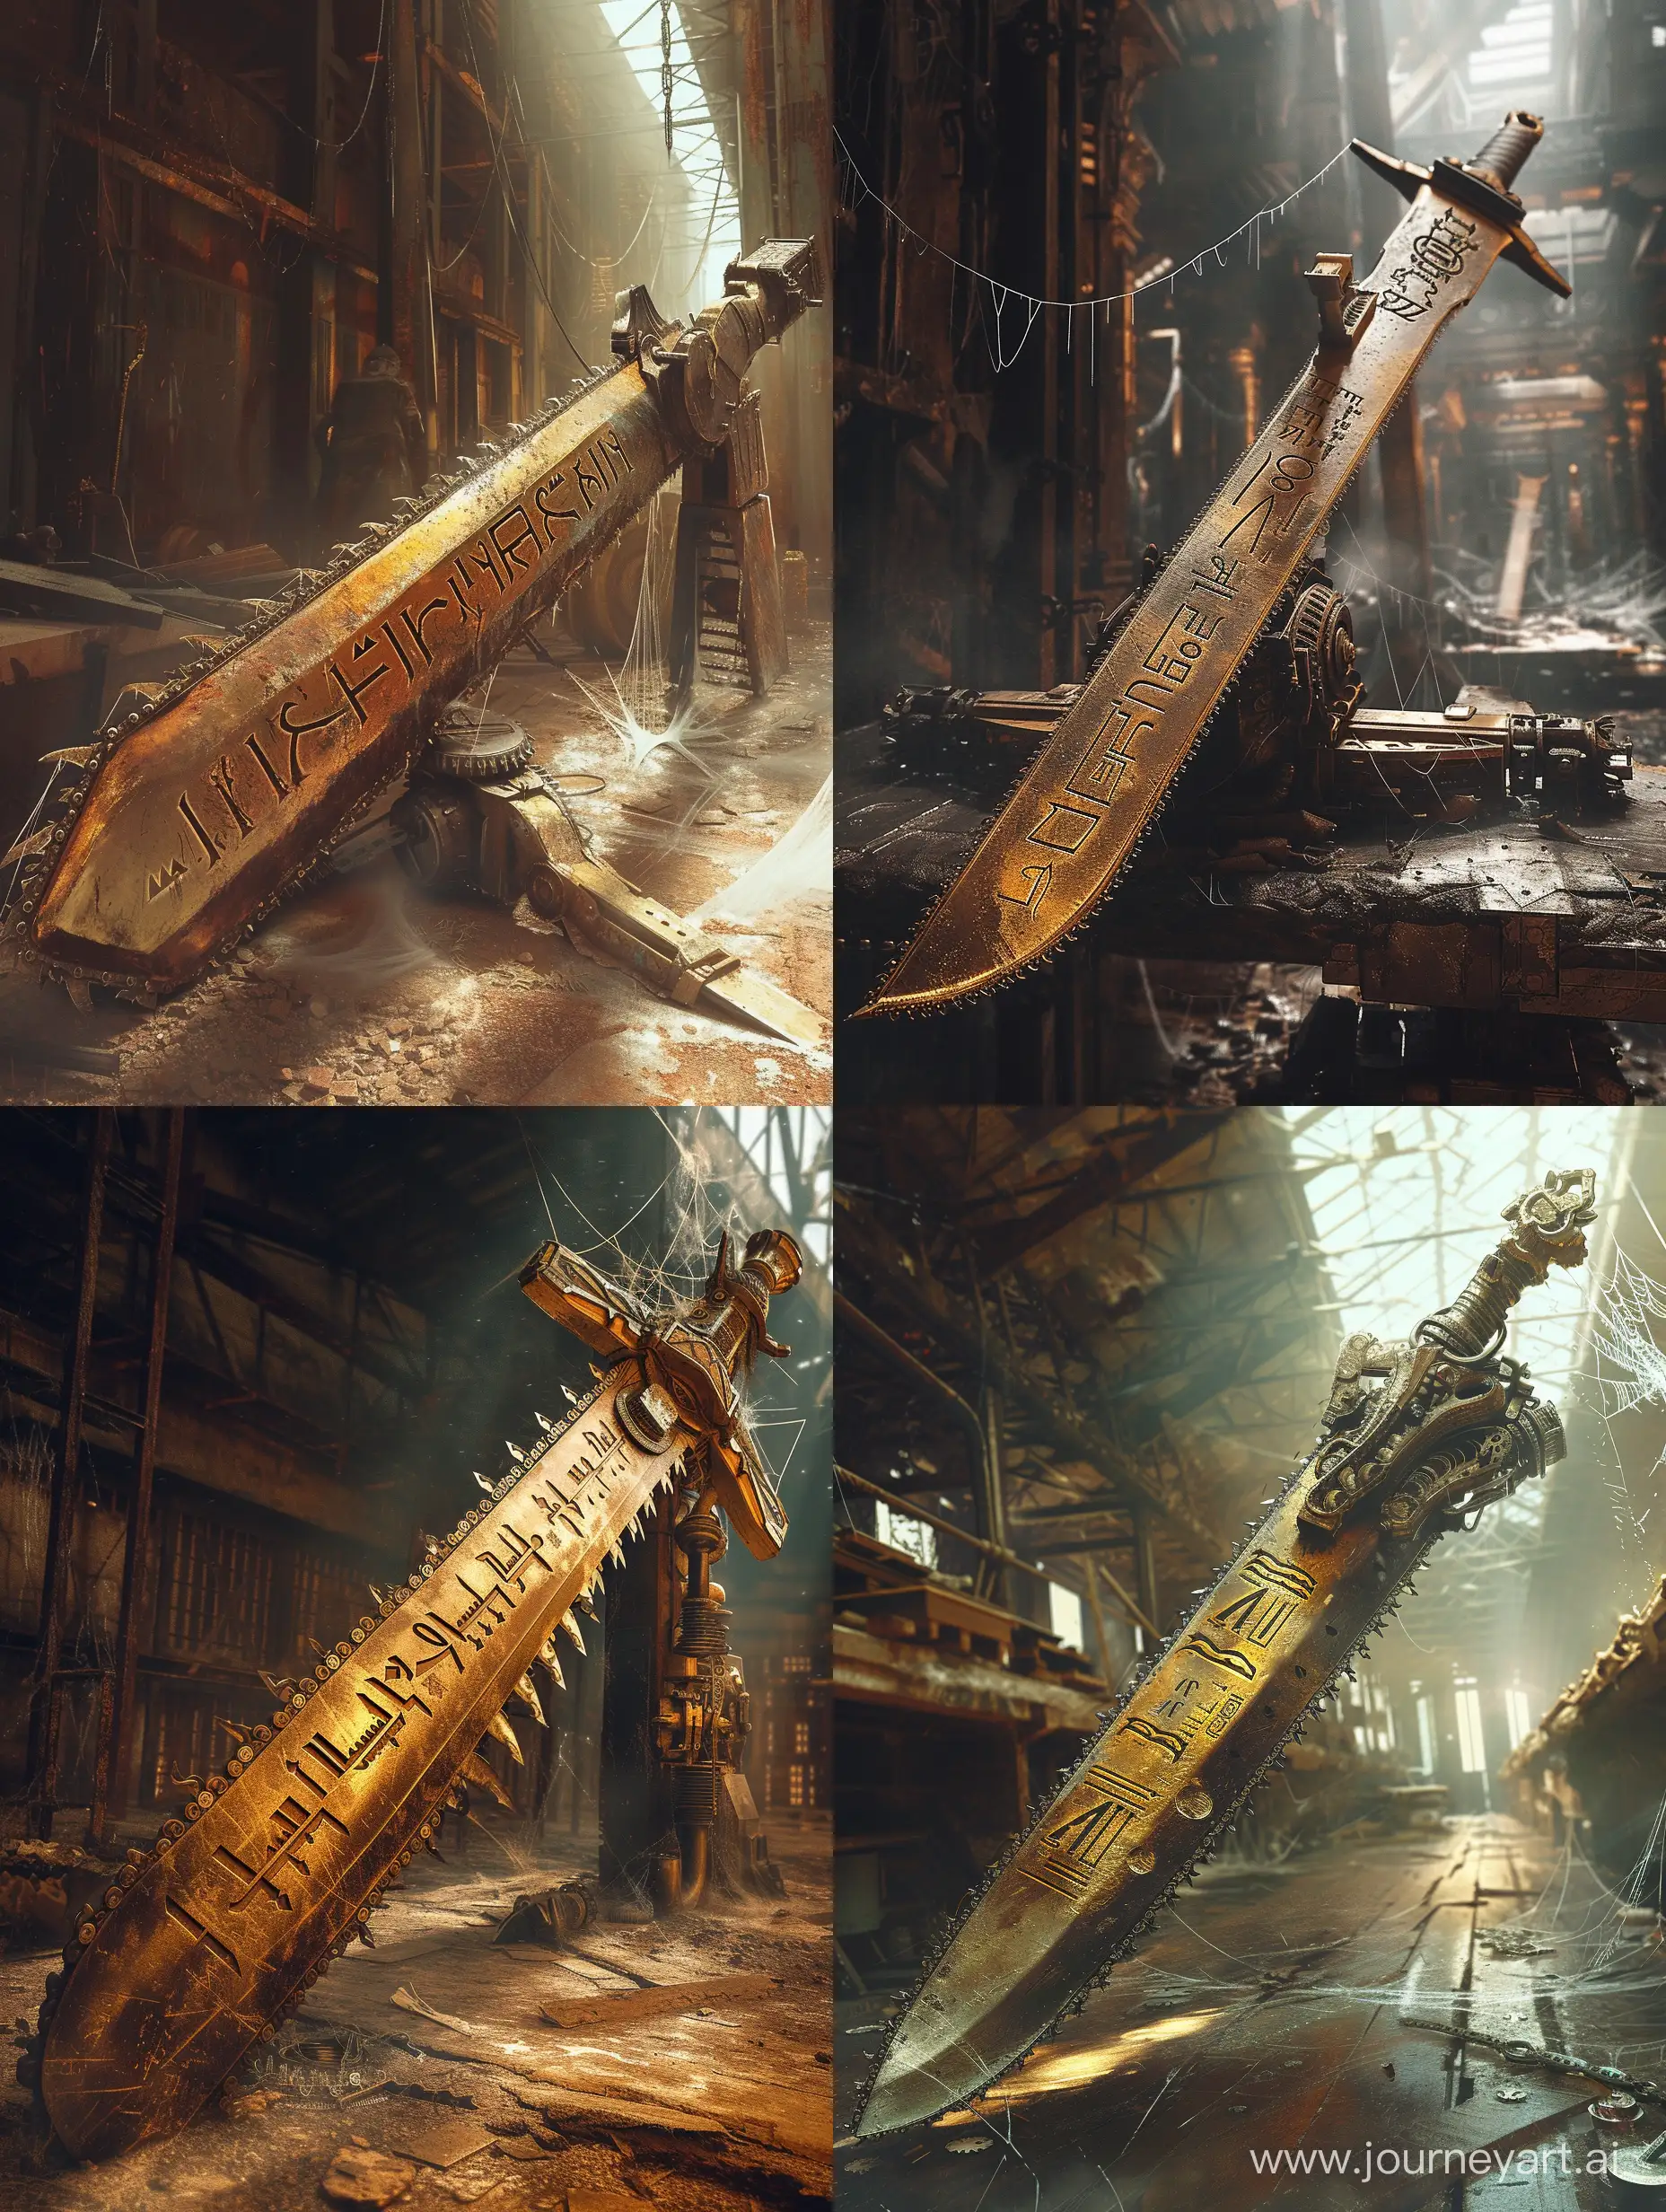 Intricate-Persian-Sword-with-Chainsaw-Blades-and-Cuneiform-Letters-in-a-Steampunk-Setting